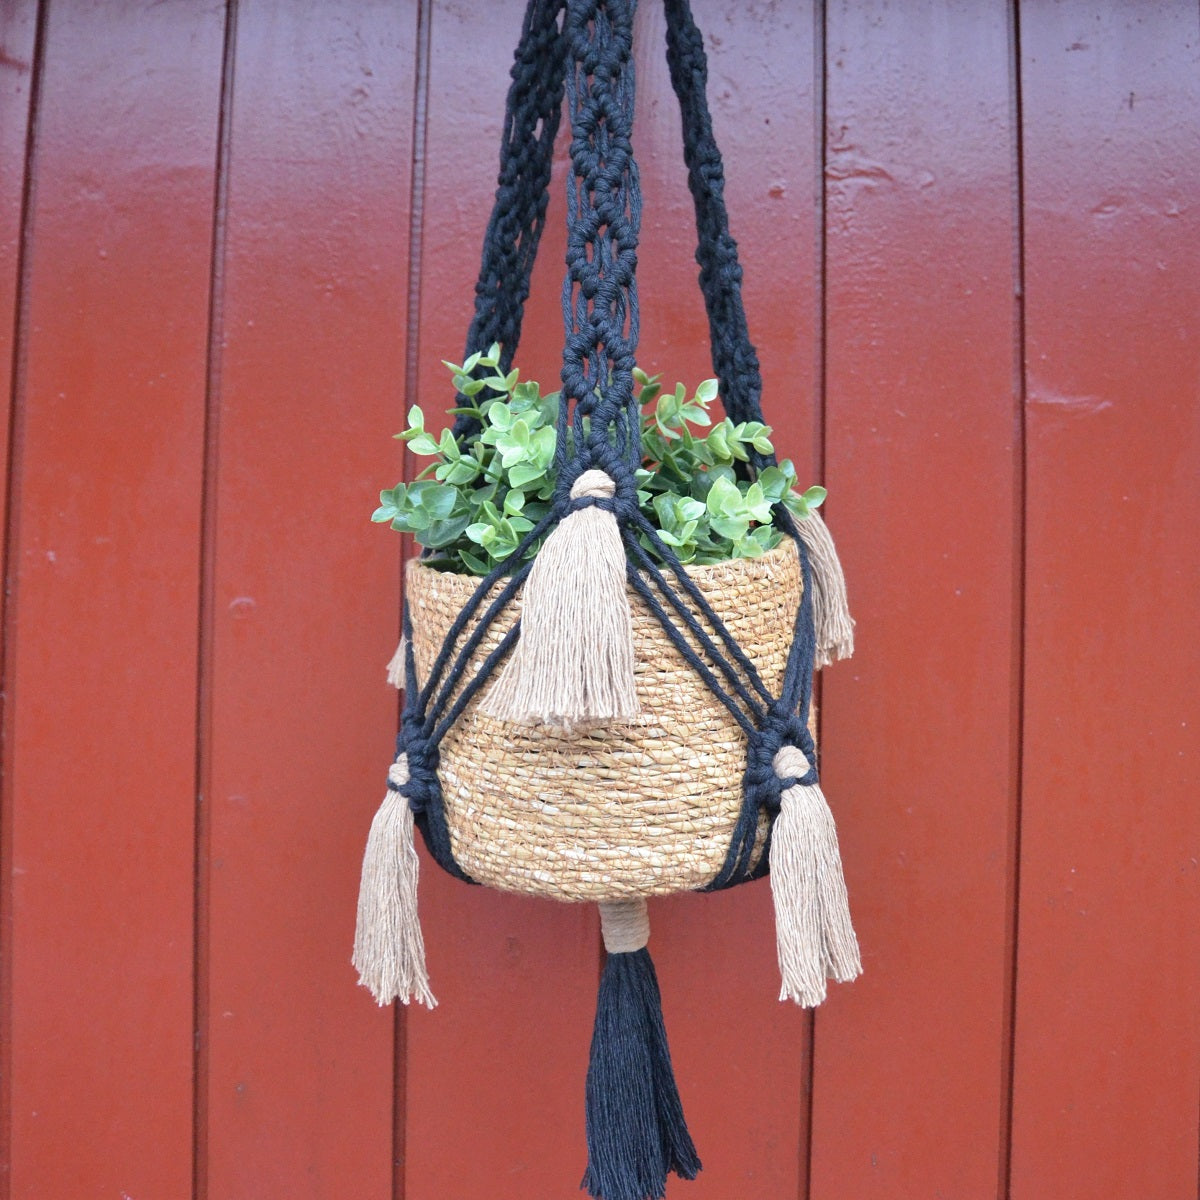 A black macrame plant hanger with brown fringe detailing with a brown planter and plant in it